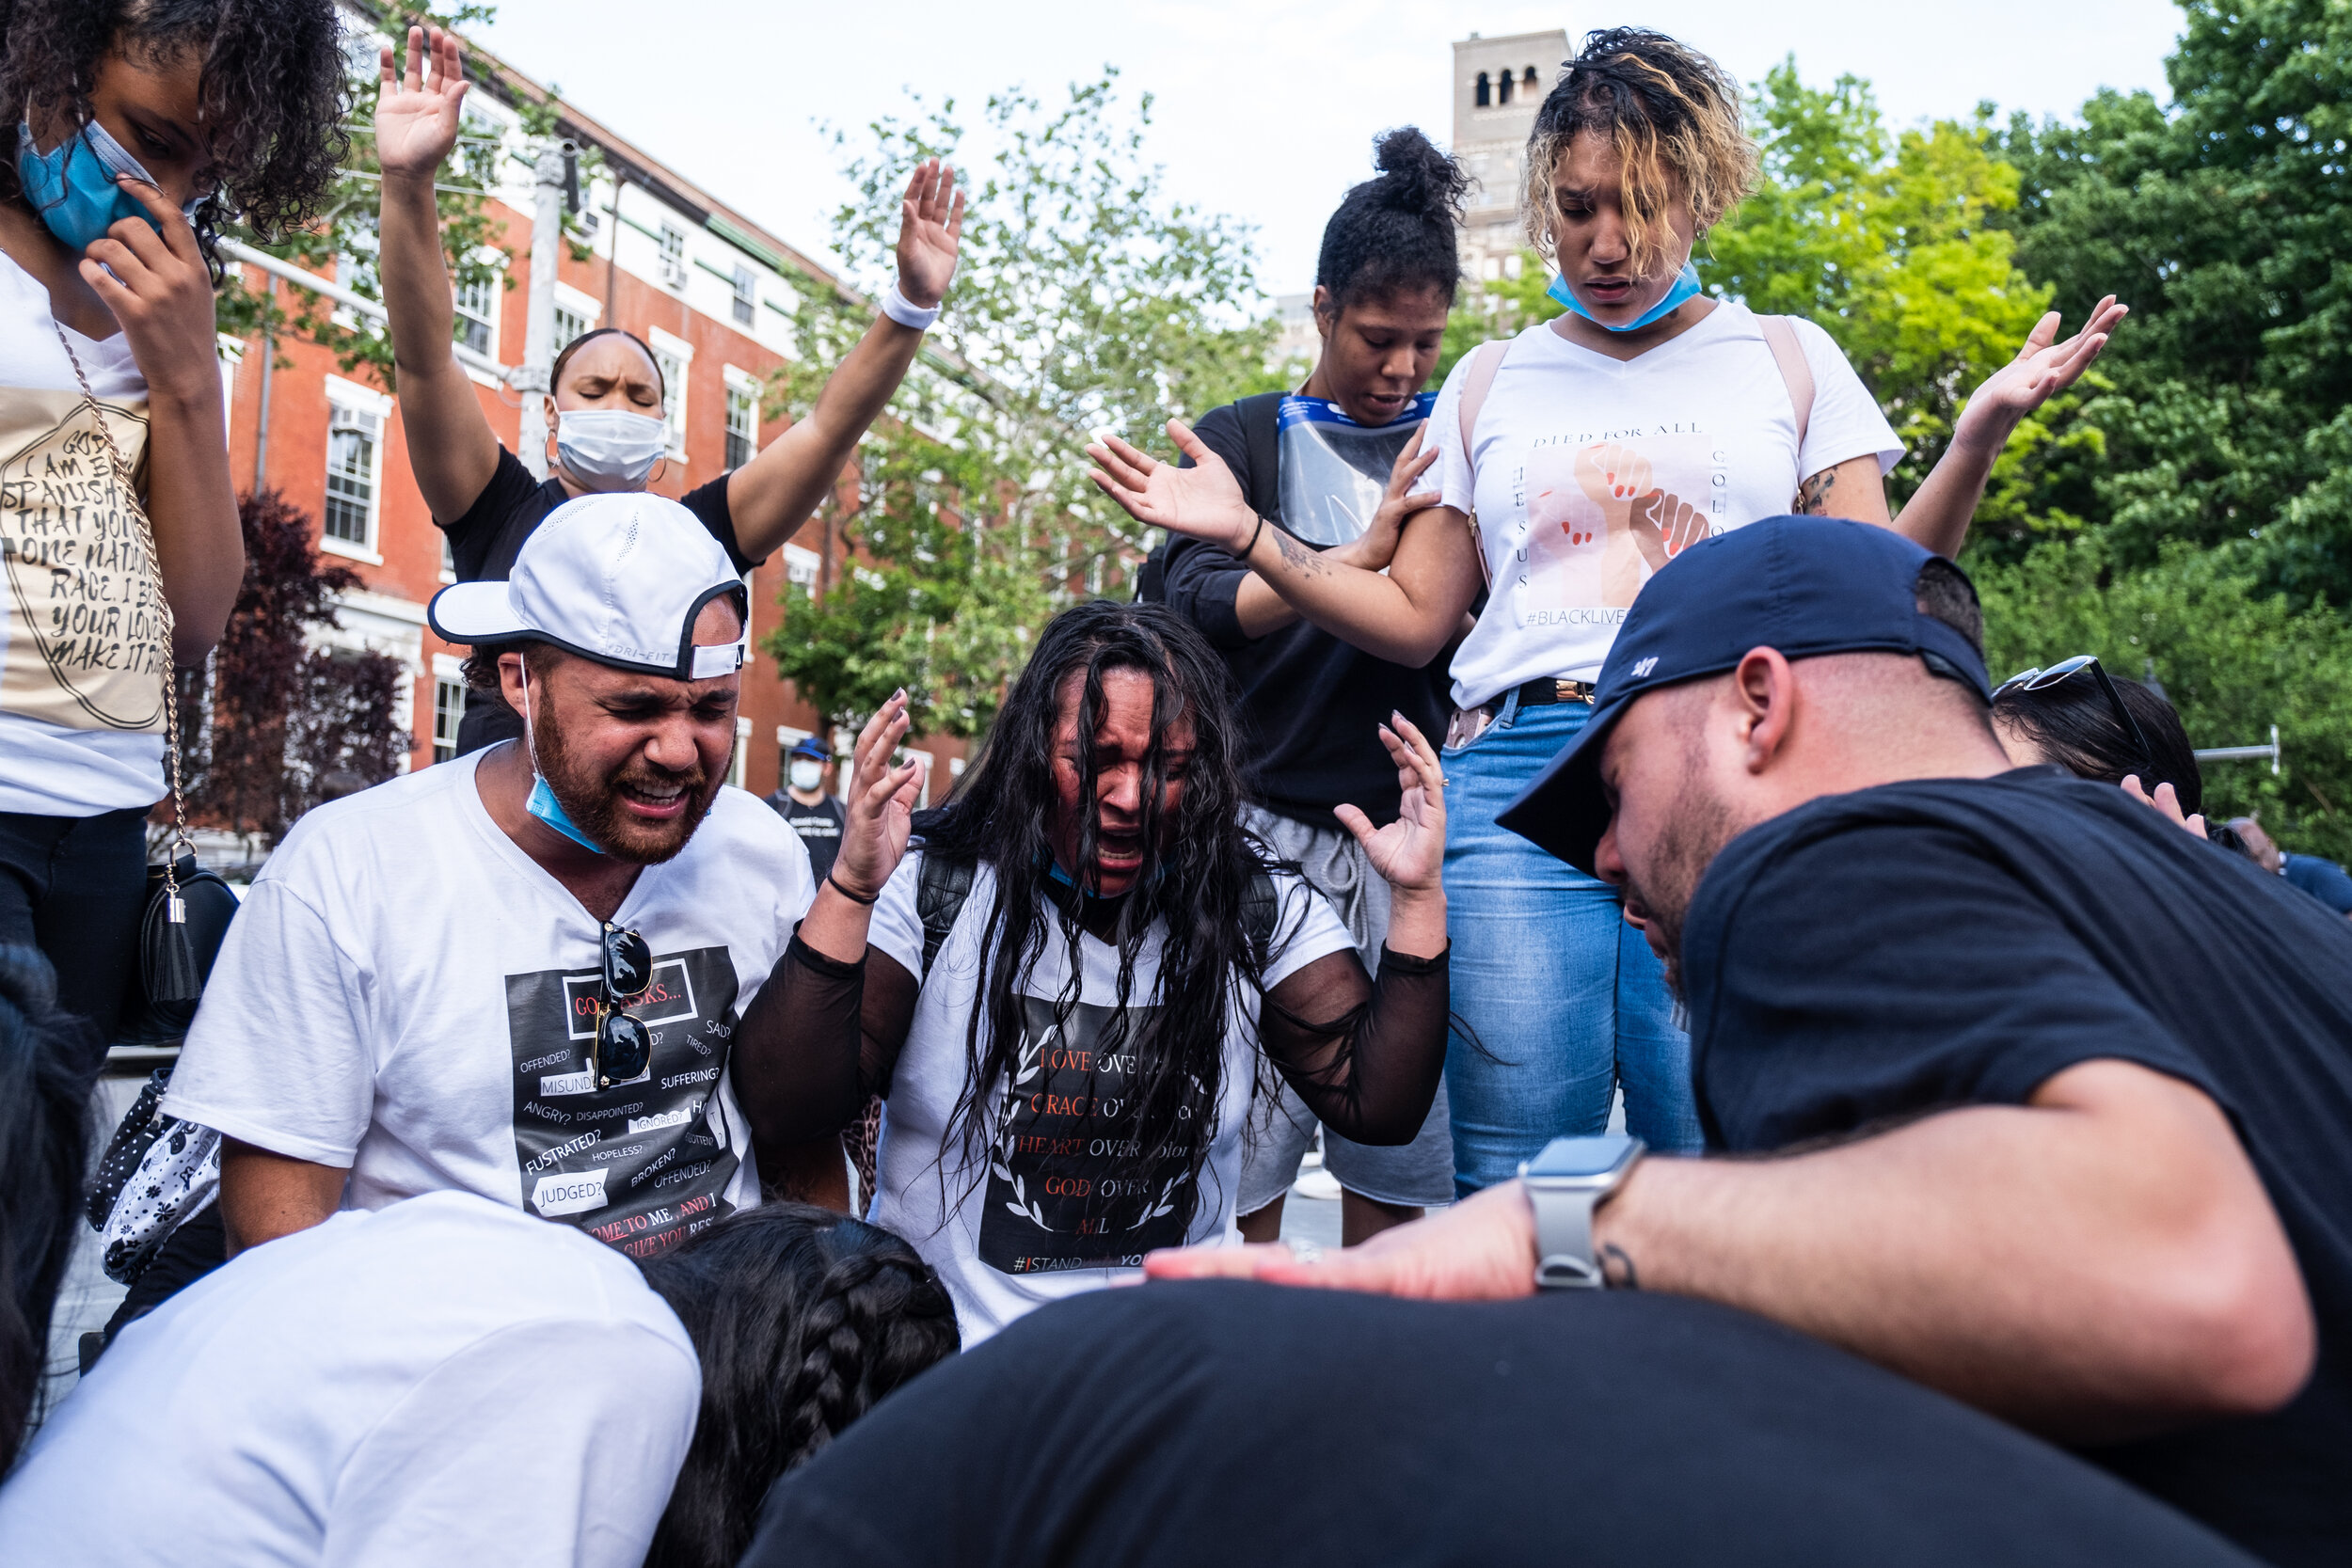  June 6, 2020: New York, NY -   A prayer group in Washington Square Park during a protest after George Floyd was killed while being detained by Minneapolis police on May 25.  